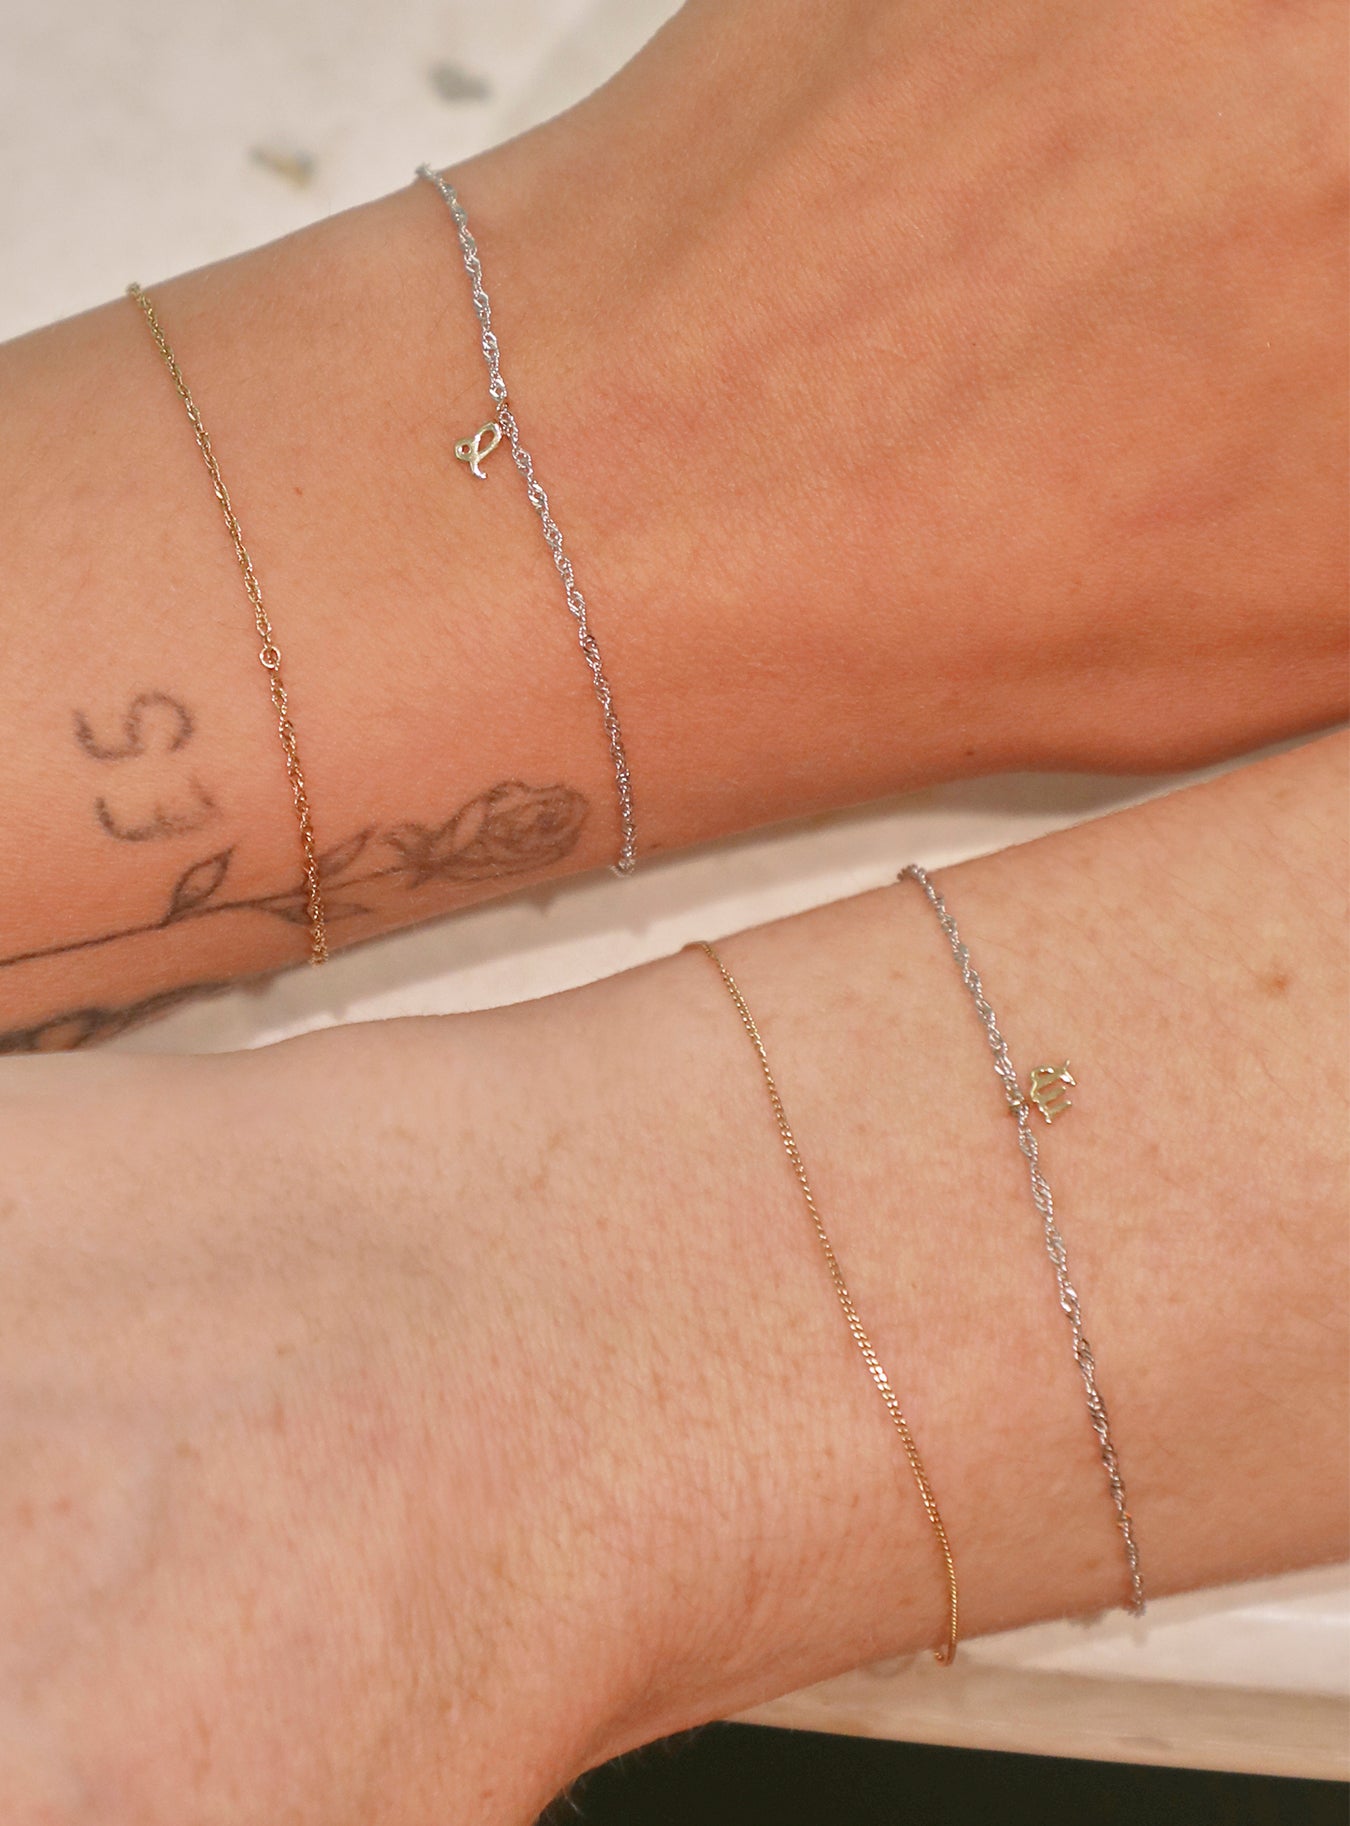 What It Was Like Getting Permanent Jewelry Welded Onto My Wrist